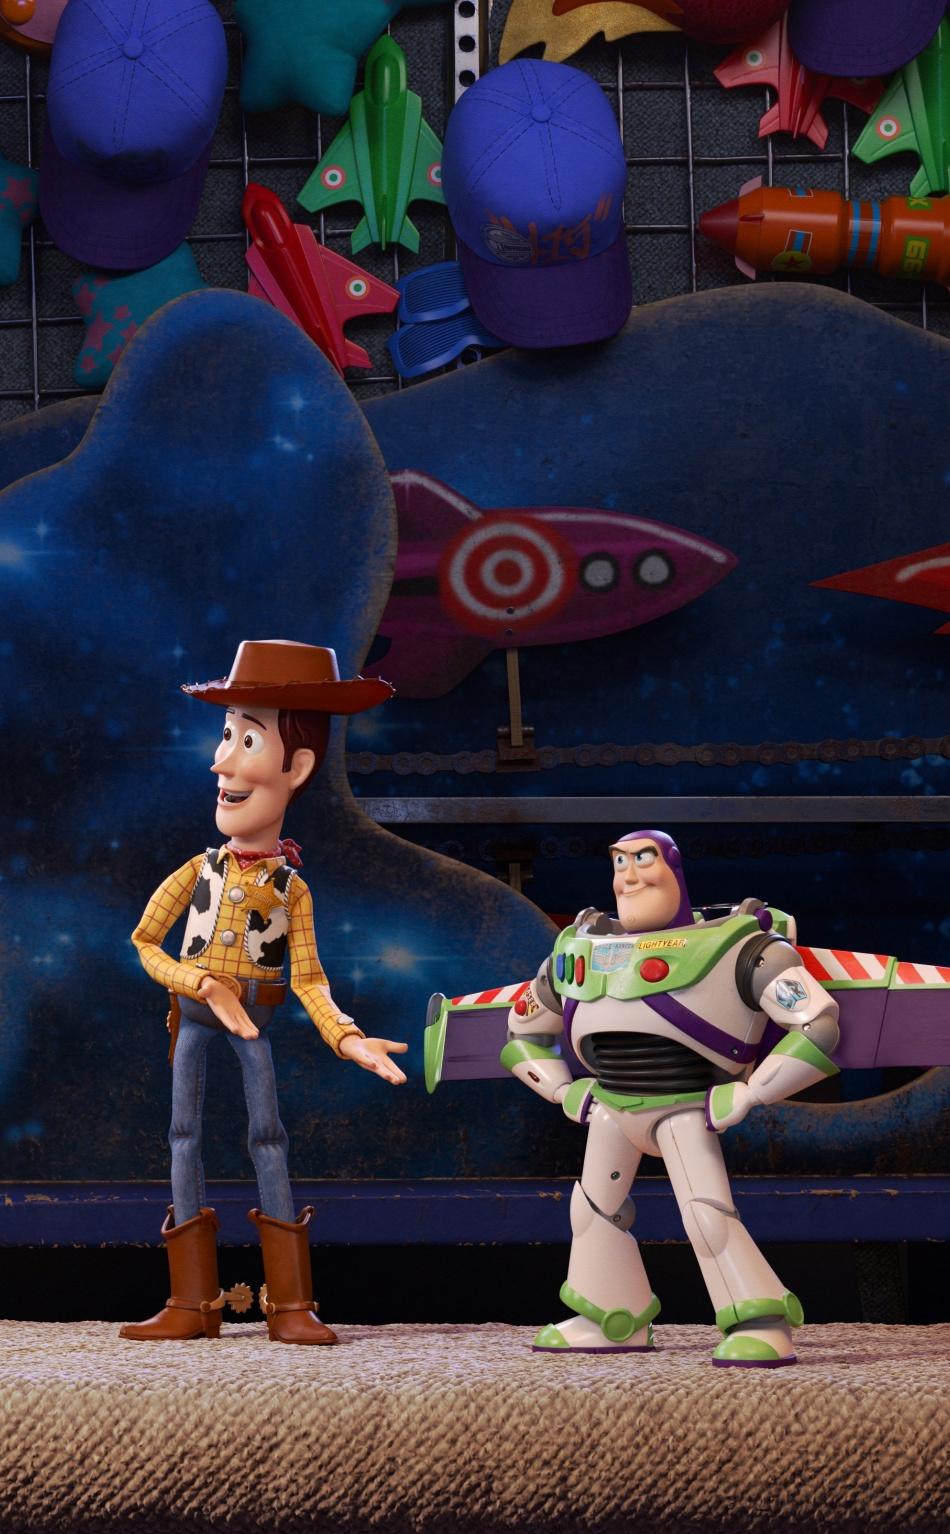 Toy Story 4 Wallpaper. Toy Story 4